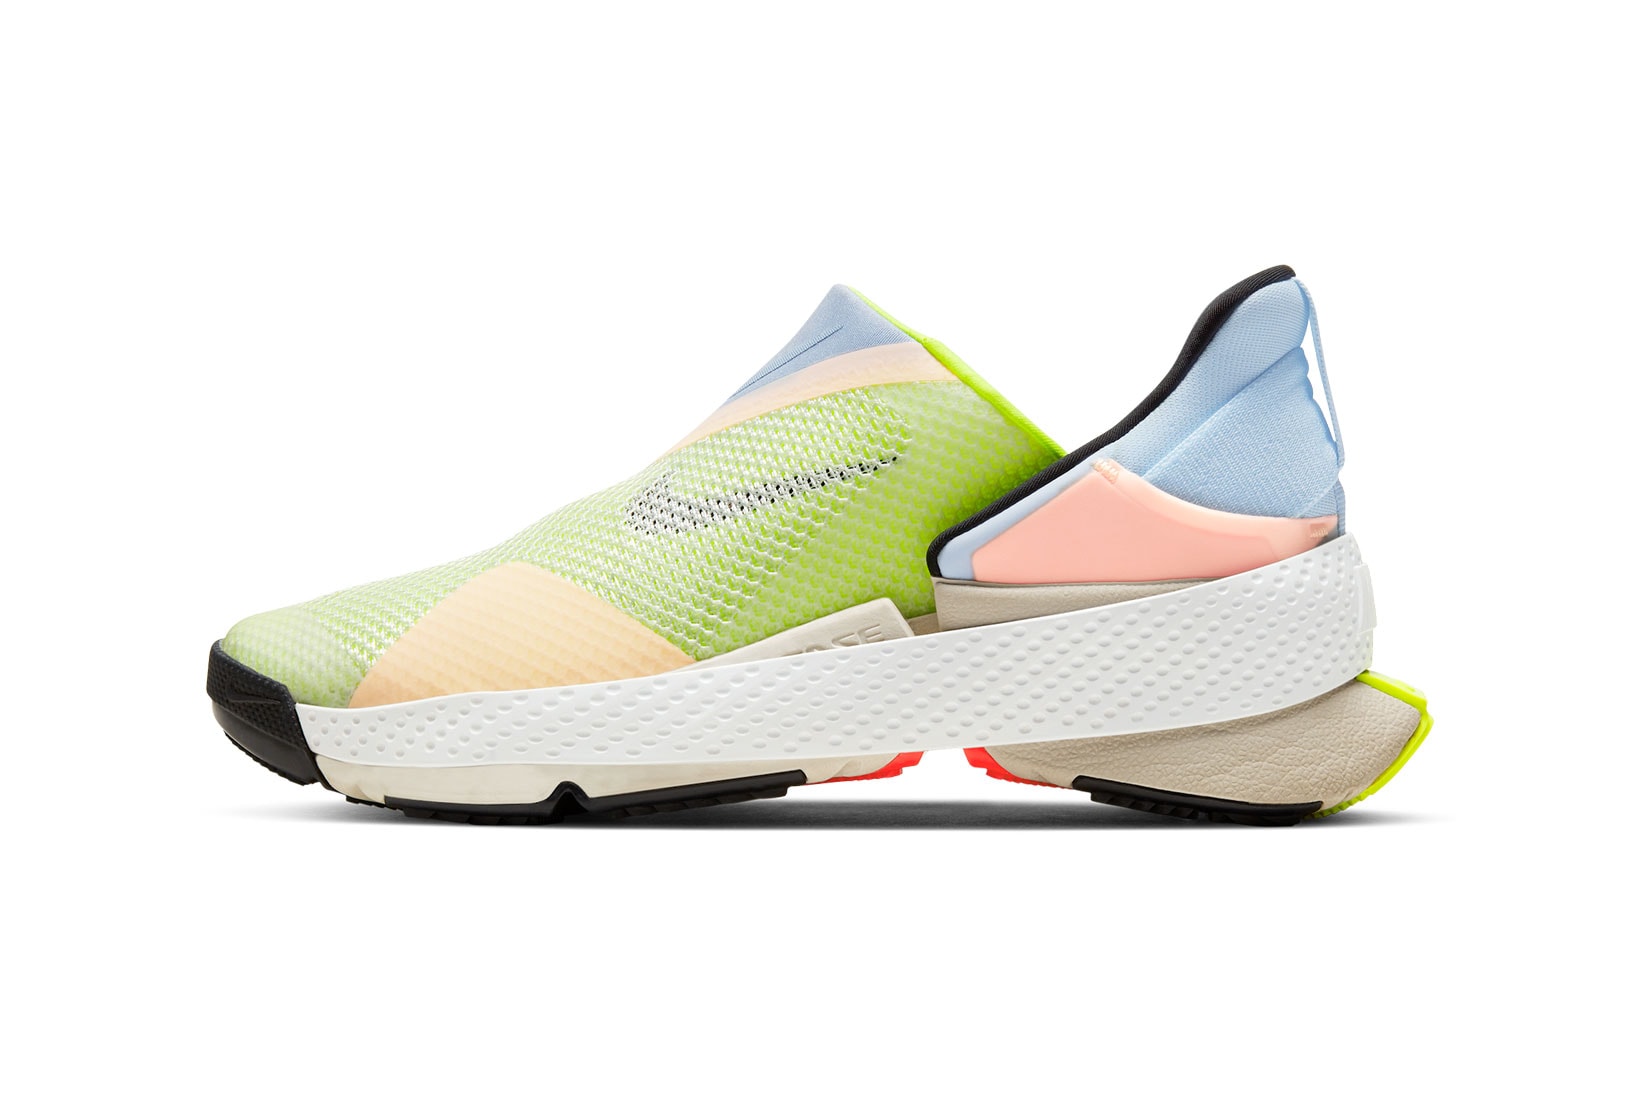 nike go flyease sneakers sneaker innovation technology design volt yellow white peach coral blue